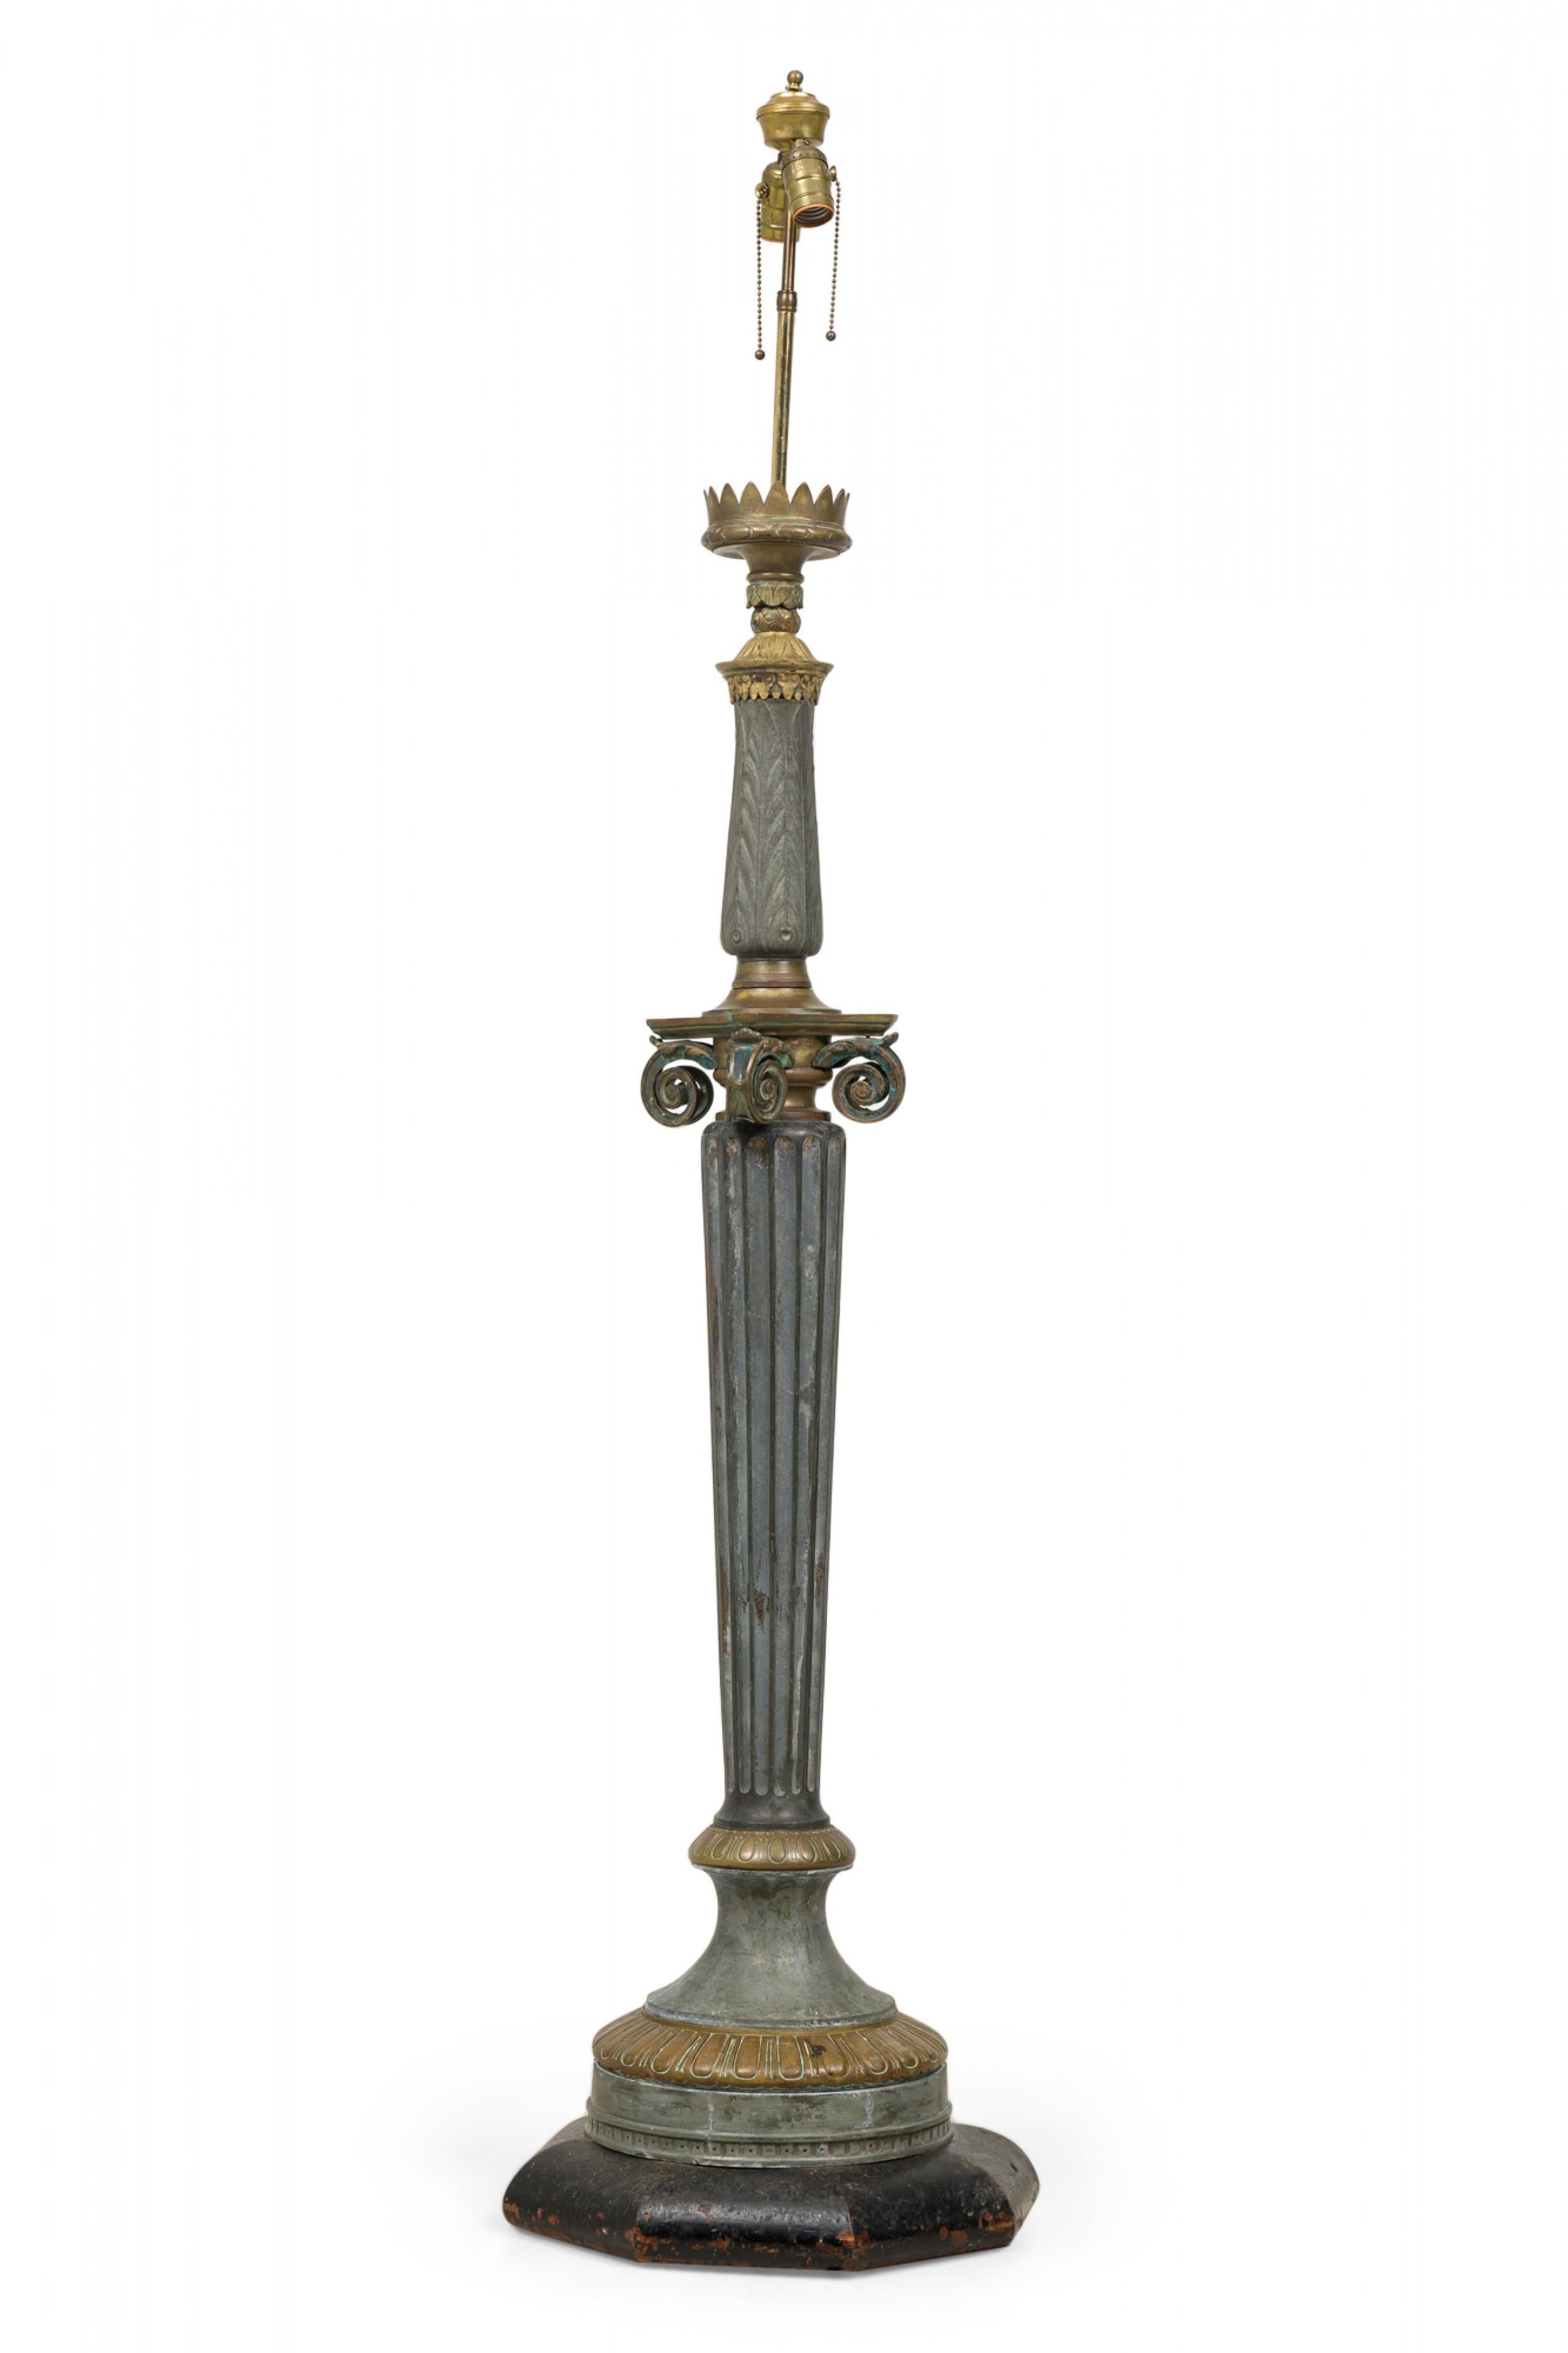 French Empire-style floor lamp with an Ionic columnar form, constructed in aluminum and brass with a heavy patina and mounted with a brass two-light fixture and a black painted wooden base.